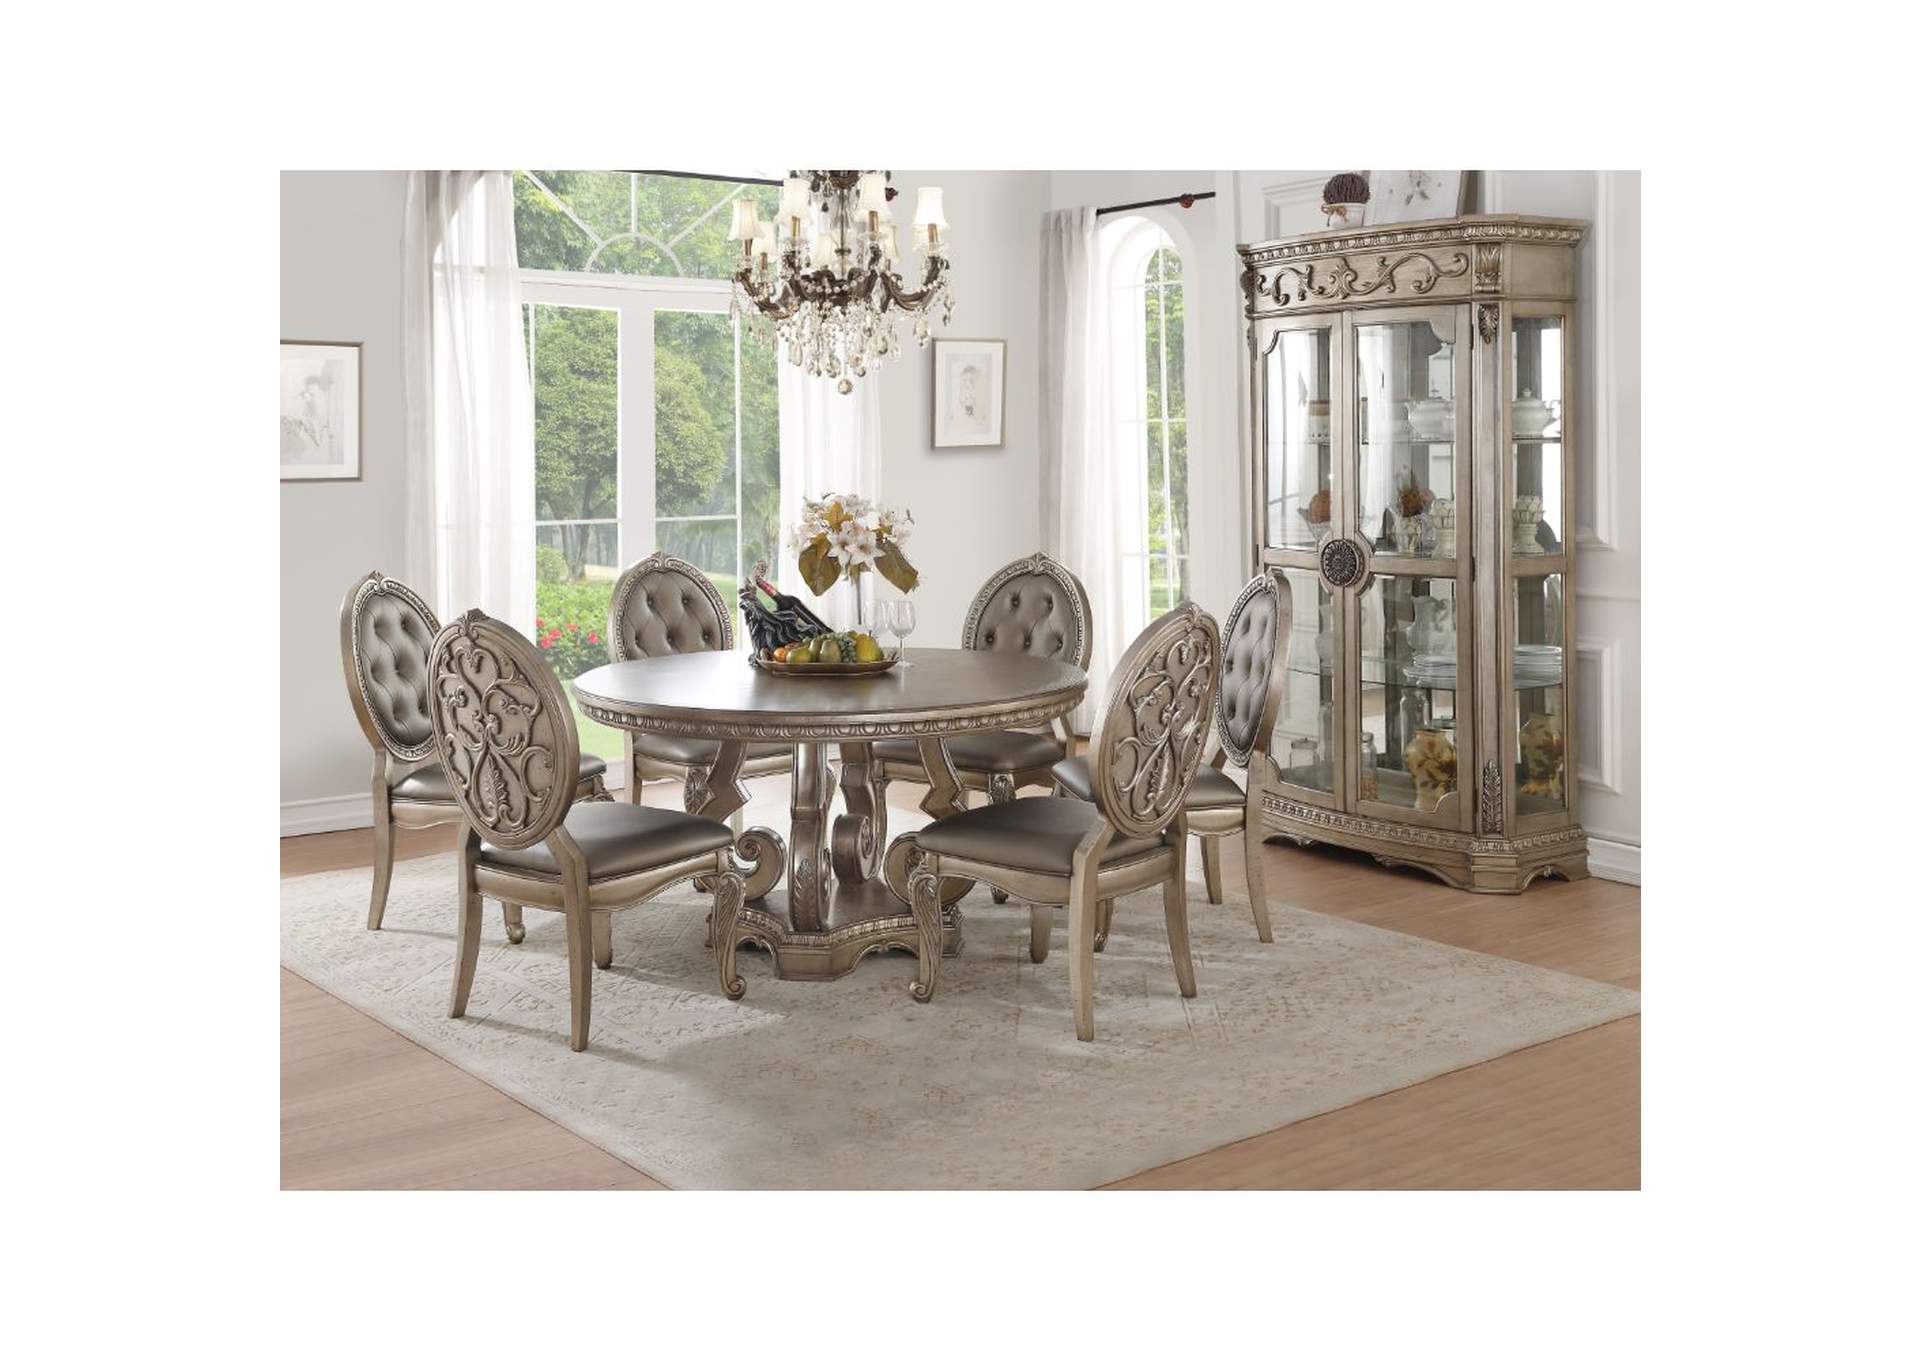 Northville Antique Silver Dining Table,Acme